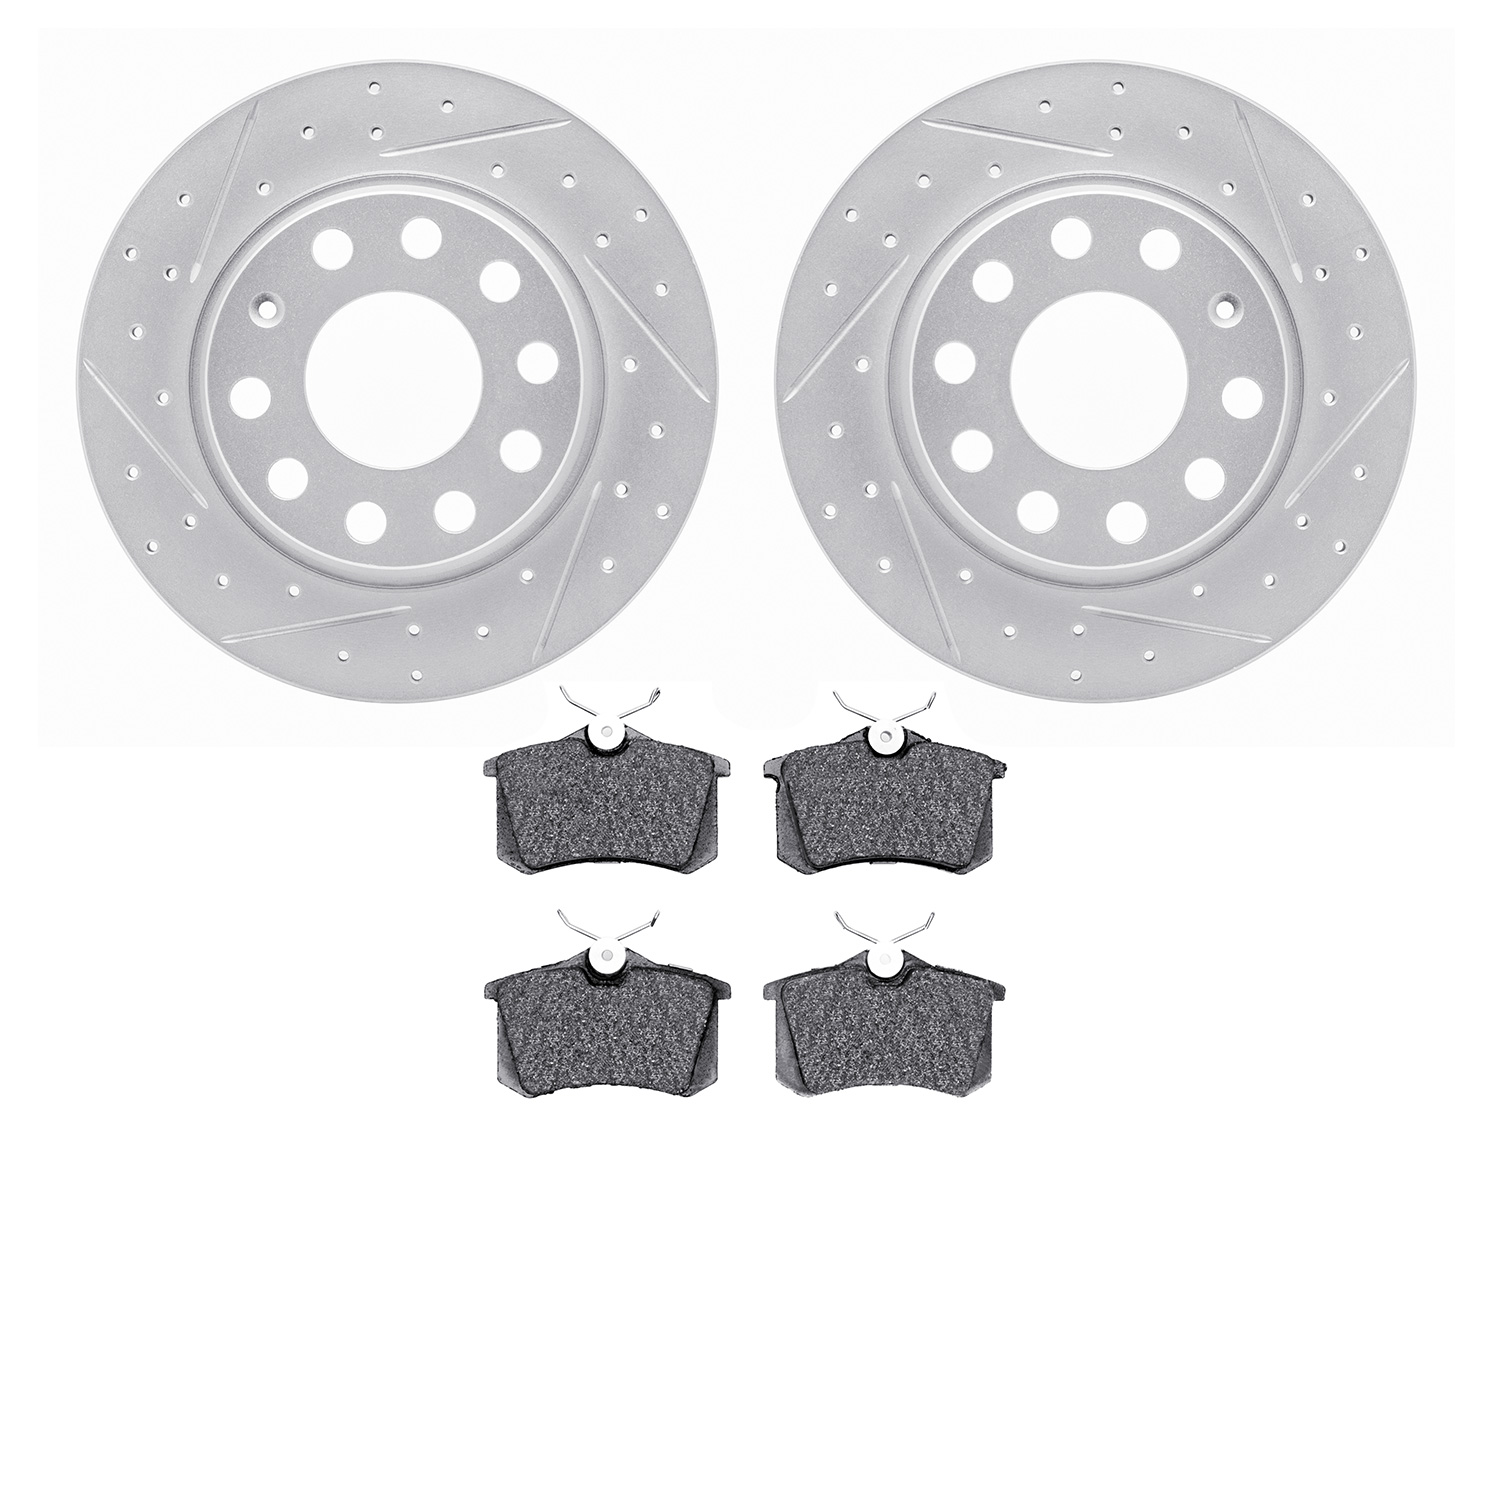 2502-73042 Geoperformance Drilled/Slotted Rotors w/5000 Advanced Brake Pads Kit, 2002-2006 Audi/Volkswagen, Position: Rear